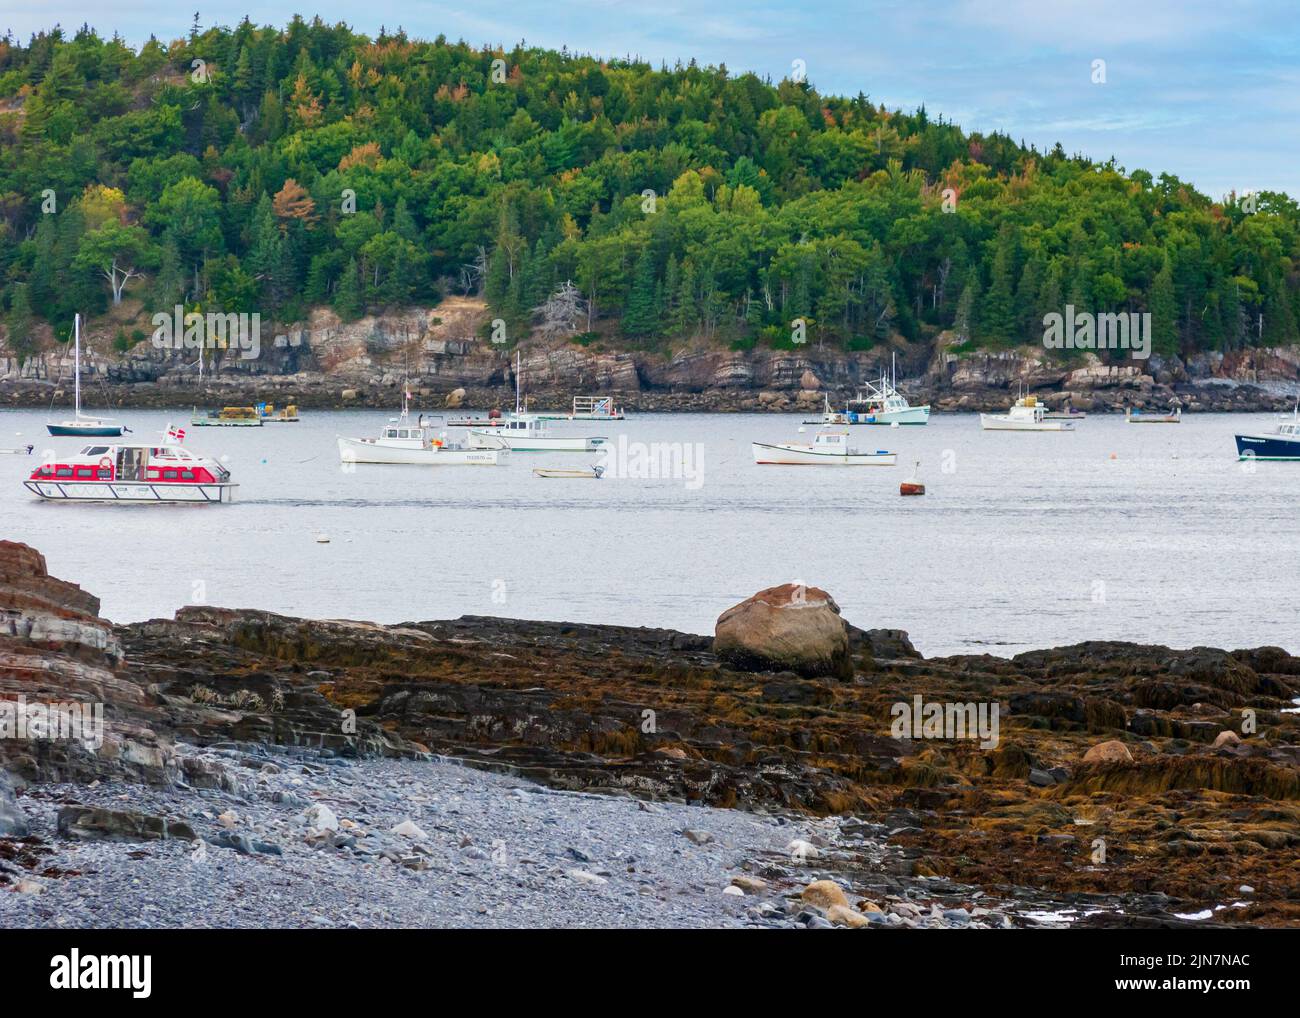 Lobster and pleasure boats anchored in Frenchman bay of Mt. Desert Island, Bar Harbor, Maine, USA. Stock Photo